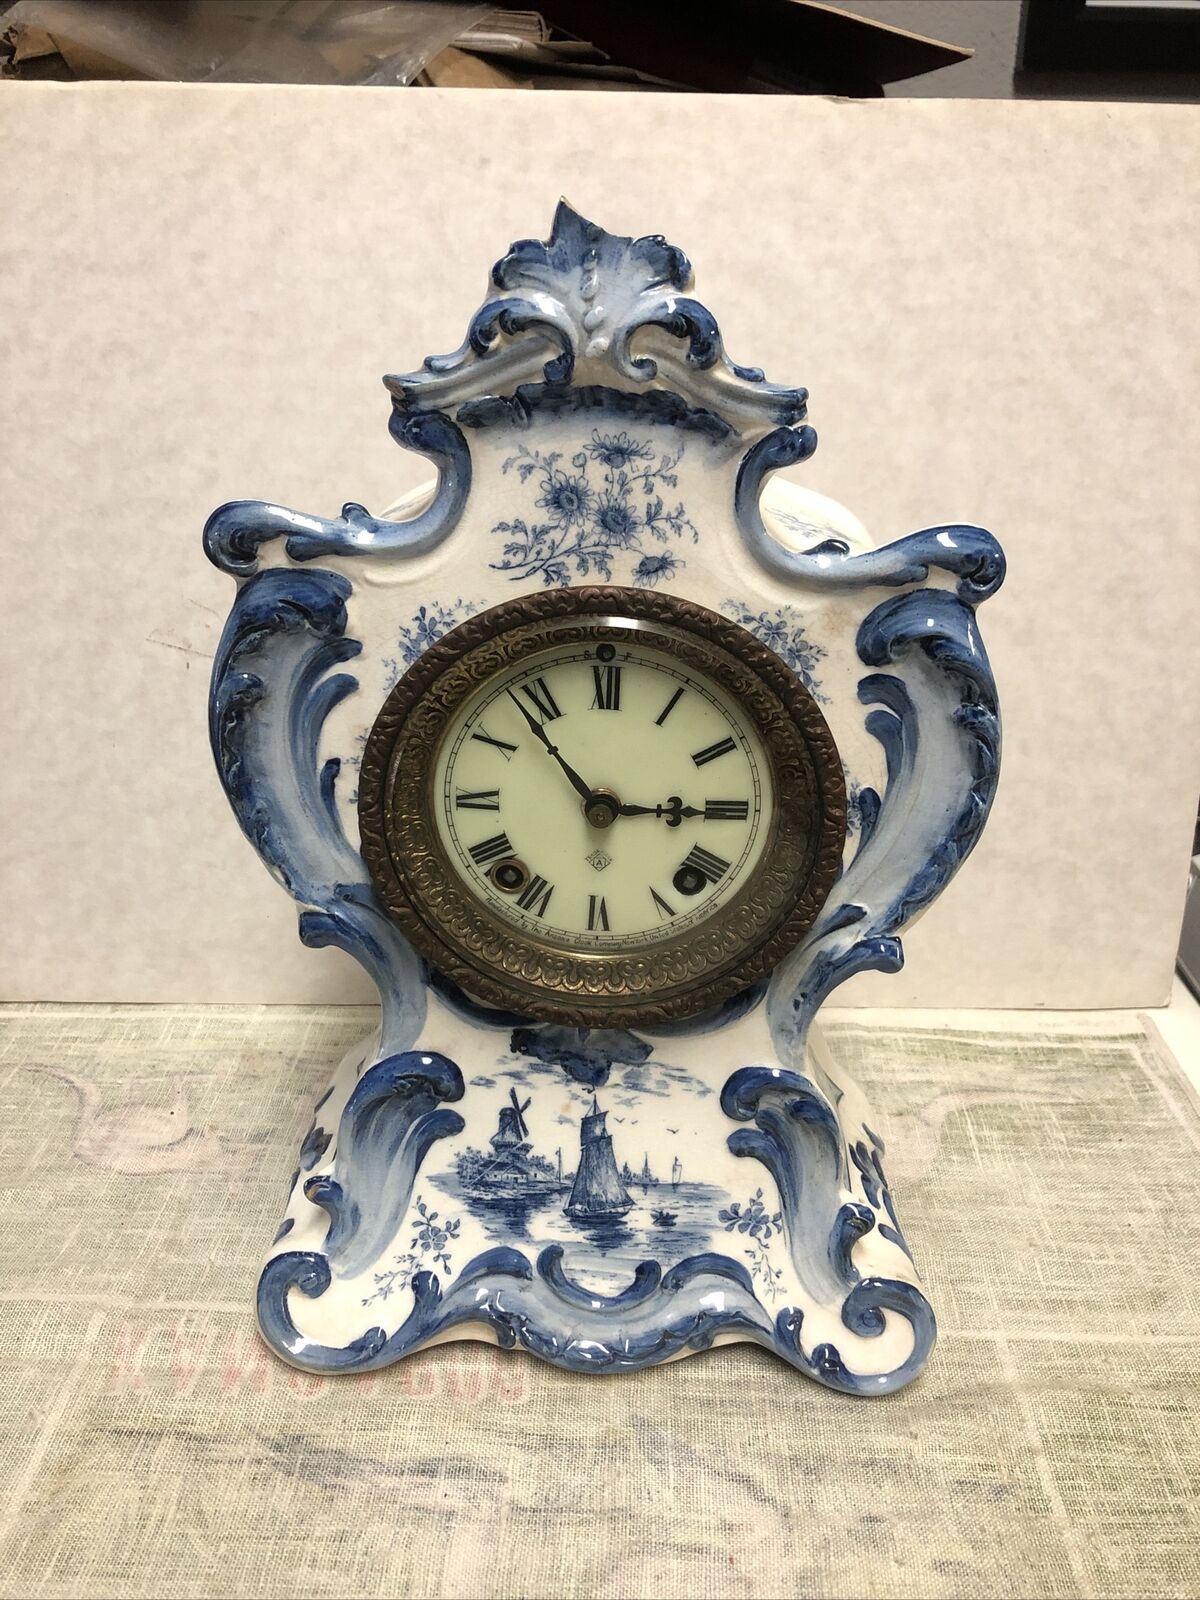 Antique ANSONIA German Porcelain Mantel Clock- Has a Chip On Top- Not Running